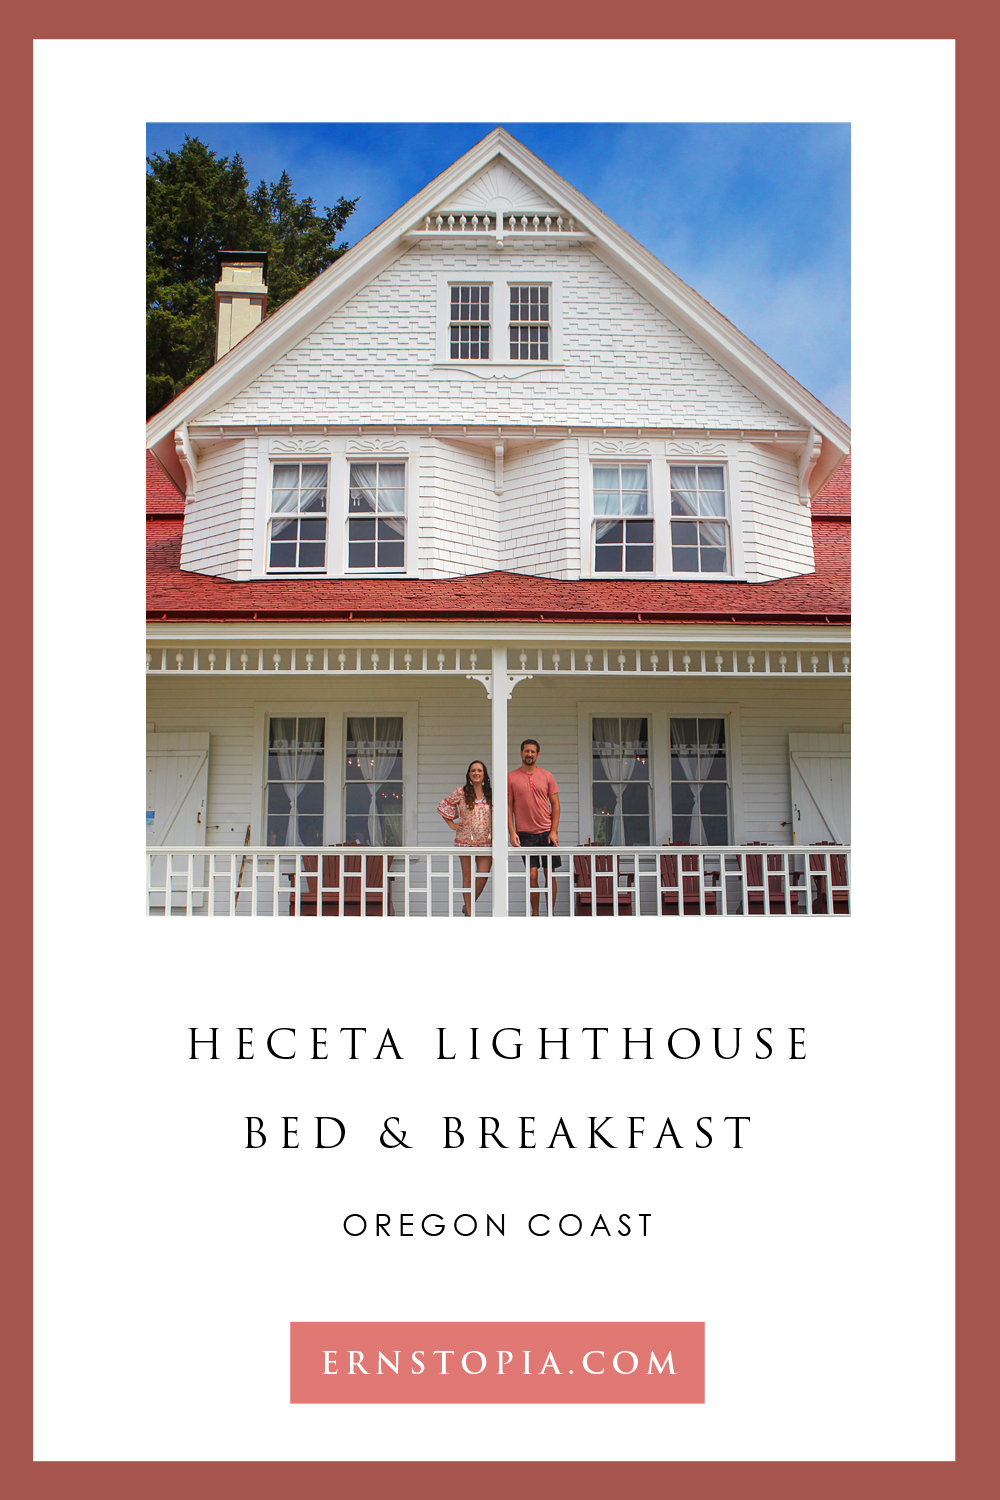 The Heceta Lighthouse Bed and Breakfast is a magical place nestled on the Oregon Coast with stunning views and a delicious breakfast.a Lighthouse B&B